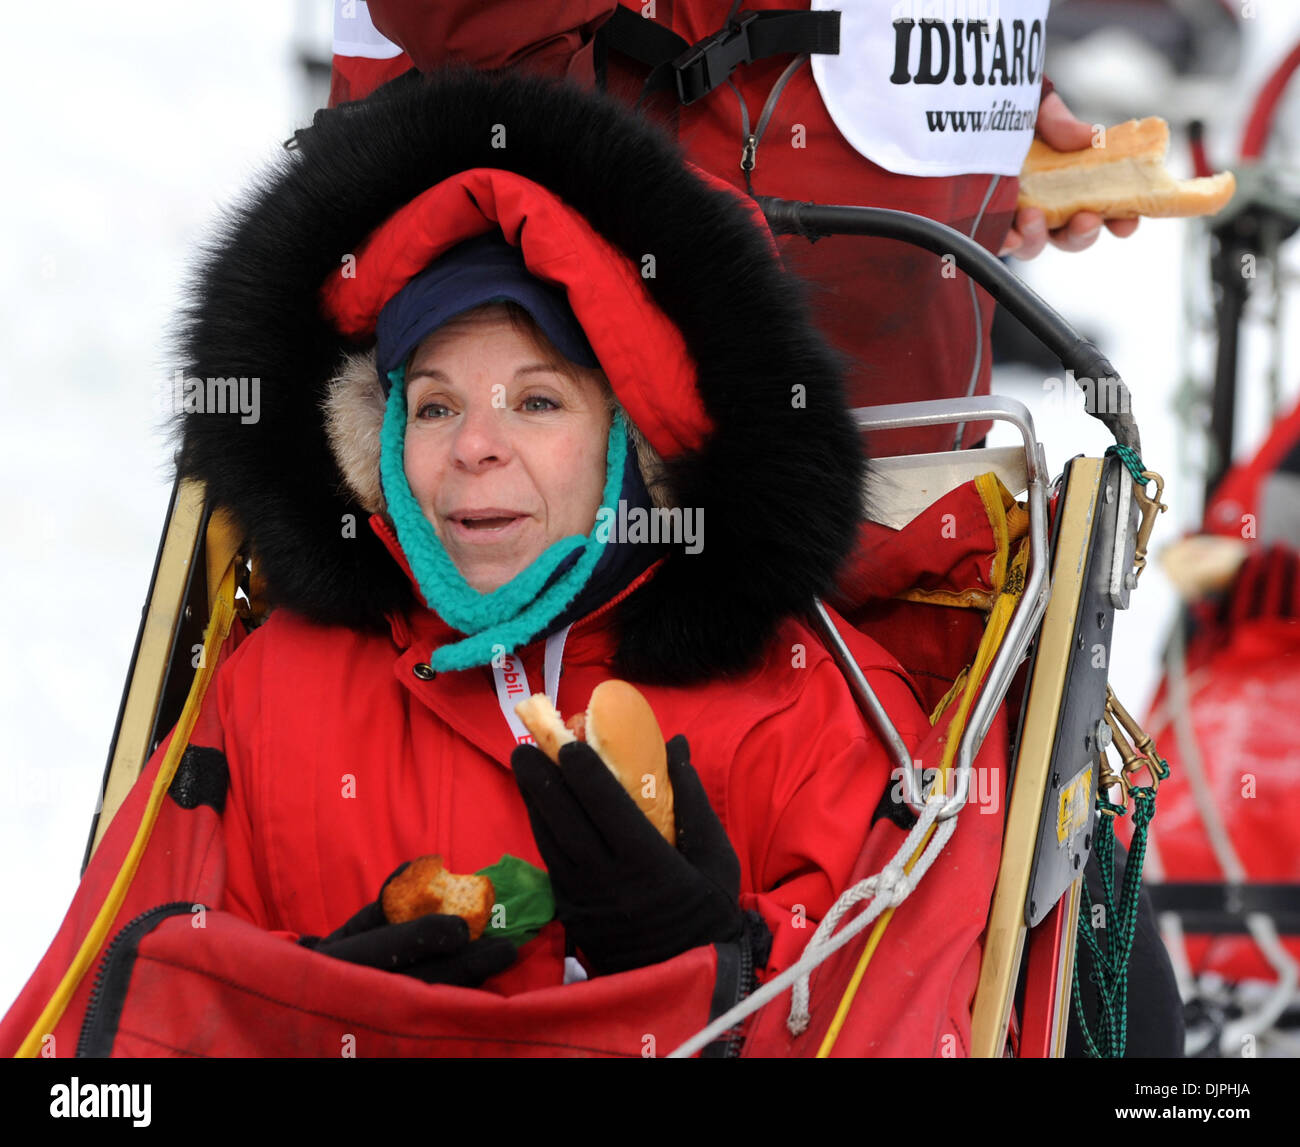 Mar 06, 2010 - Anchorage, Alaska, USA - Iditarider PATRICIA KENNEDY of Chicago winds up with a muffin and a hot dog at mile four where the trail runs adjacent to Wesleyan Drive during the Iditarod's ceremonial start Saturday morning March 6, 2010 in Anchorage.  (Credit Image: © Erik Hill/Anchorage Daily News/ZUMApress.com) Stock Photo